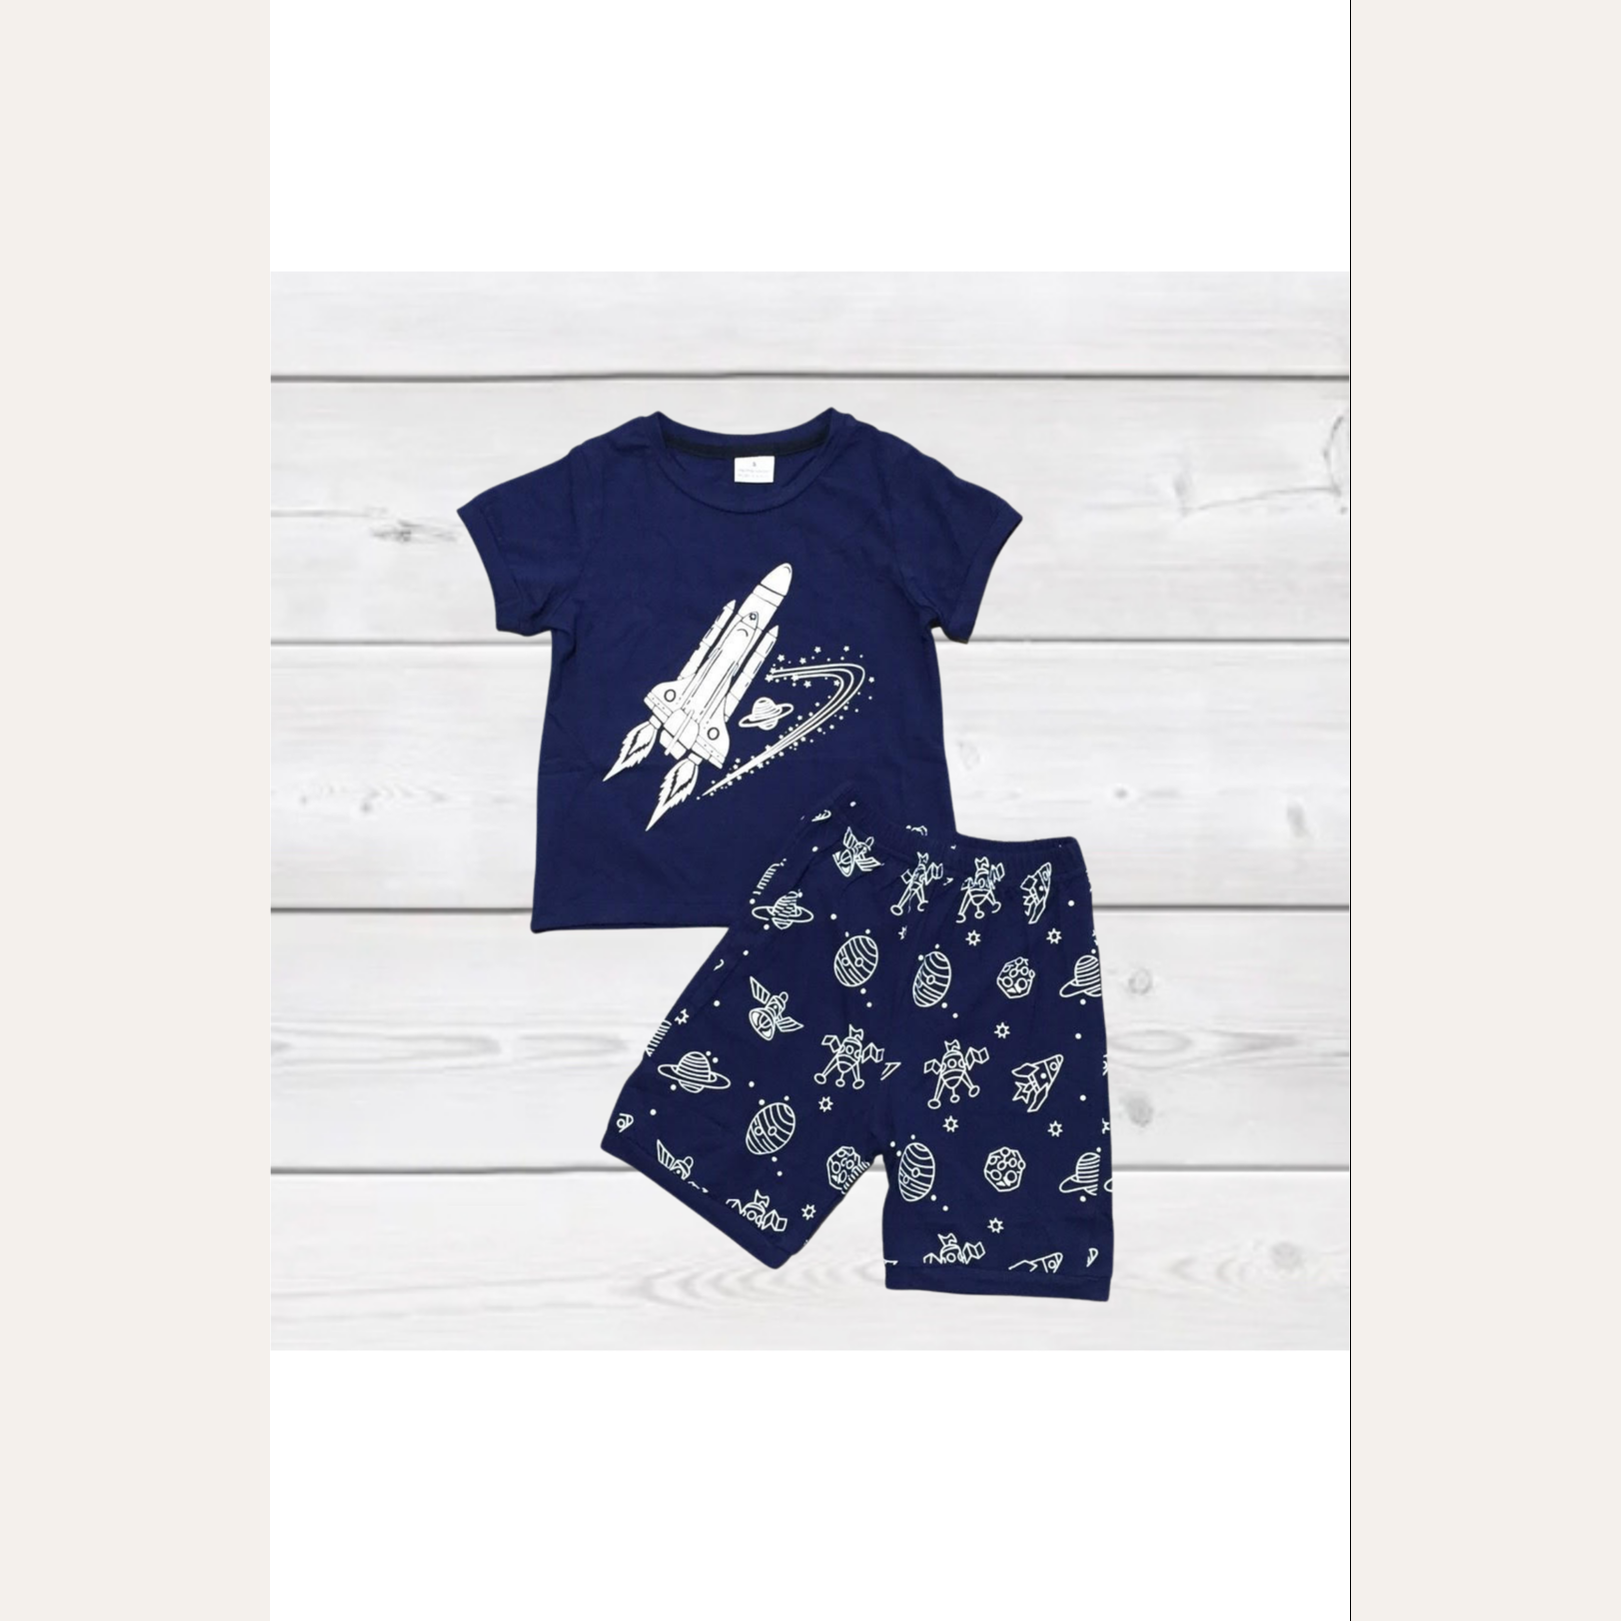 Blast off in this adorable navy and white short set! Features a white rocket shooting across and navy background graphic tee and matching shorts!  IN-STORE!